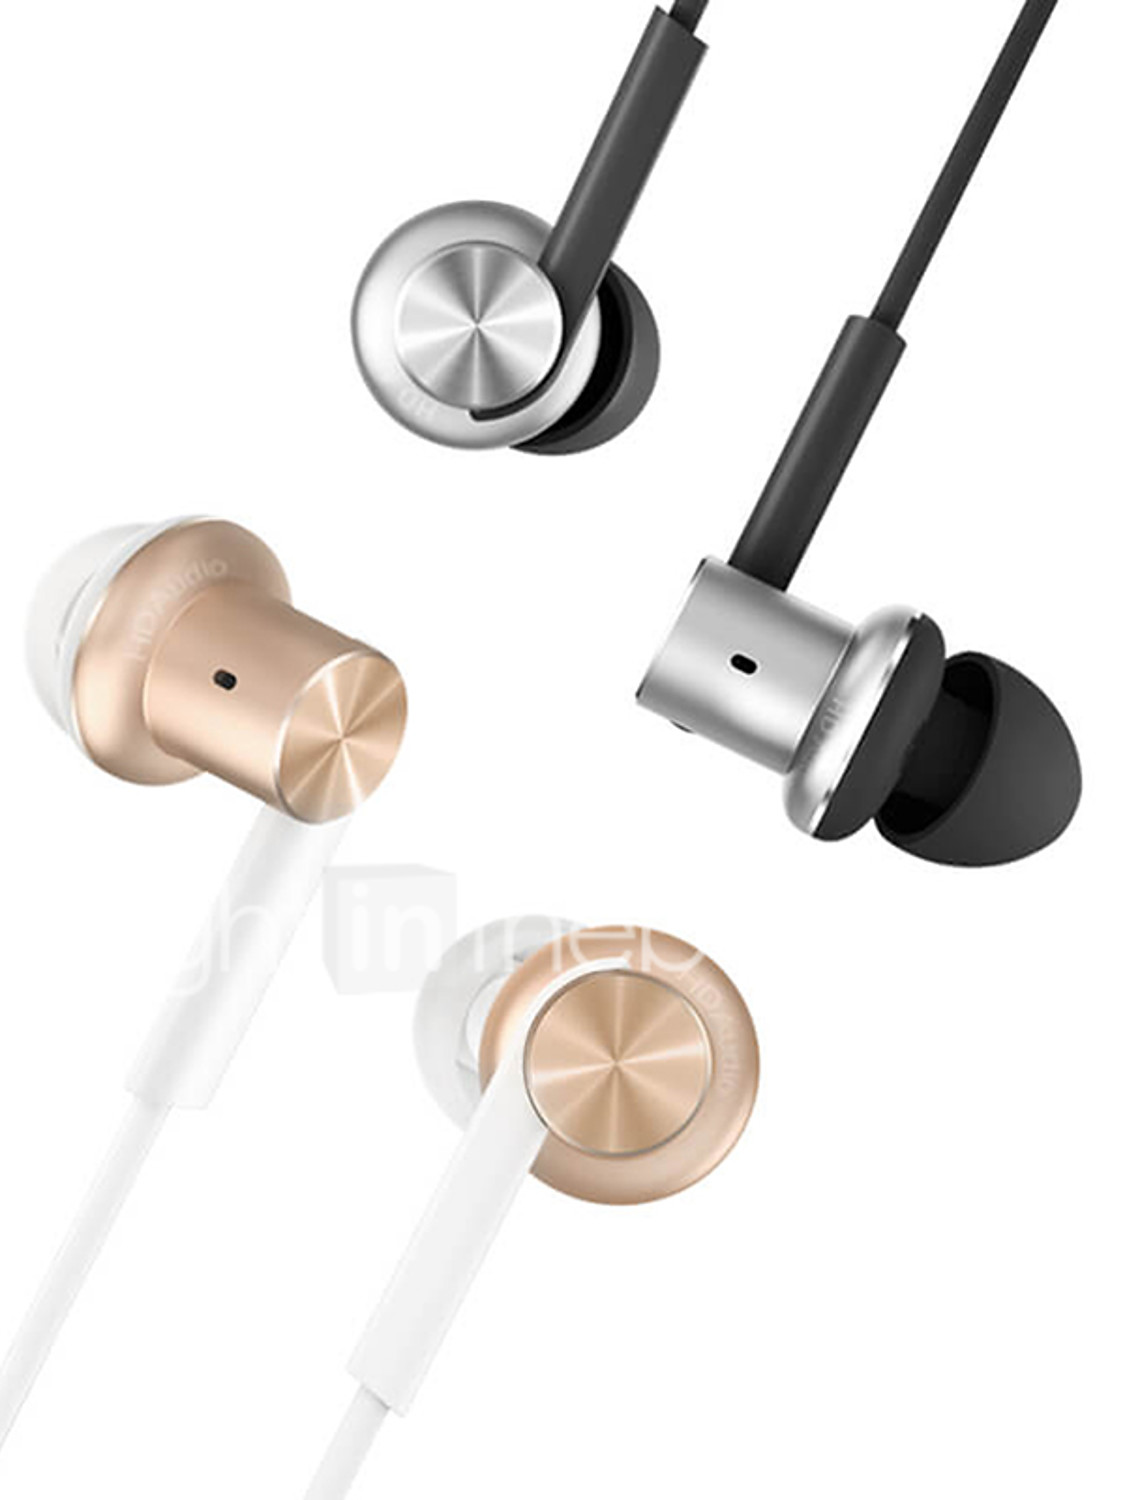 Xiaomi Mi In Ear Headphones Pro In Ear Wired Headphones Hybrid Aluminum Alloy Mobile Phone Earphone With Microphone Noise Isolating 99